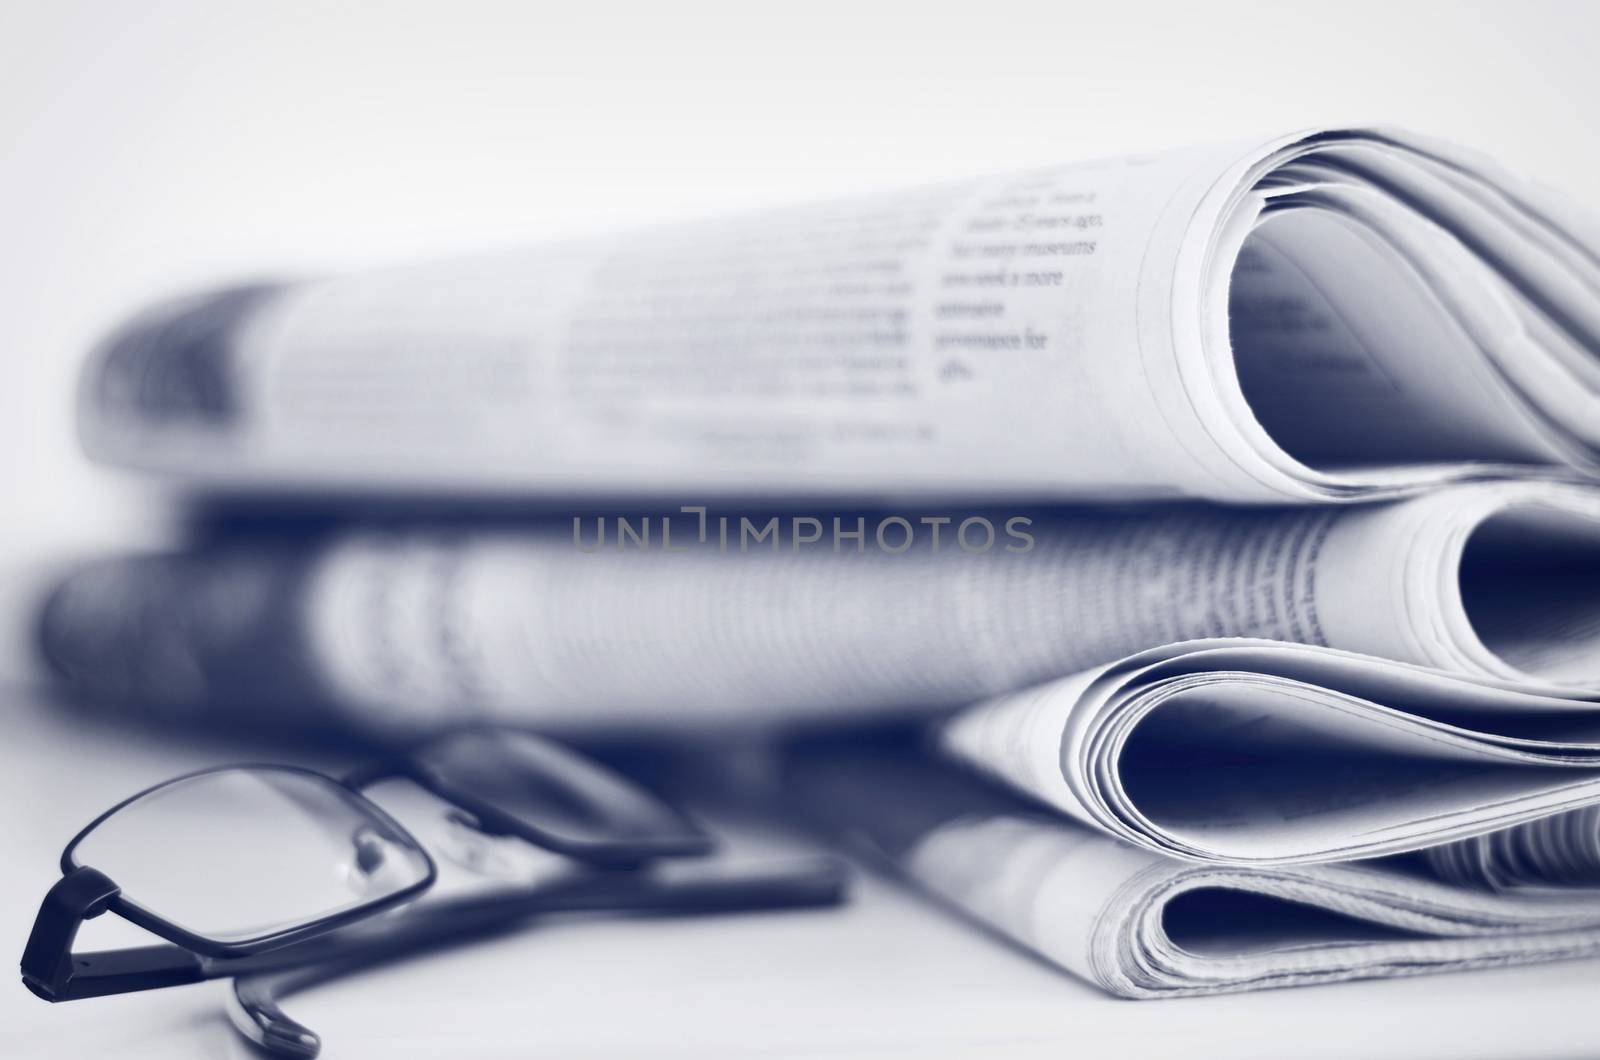 A stack of newspapers with glasses. Shallow depth of field.